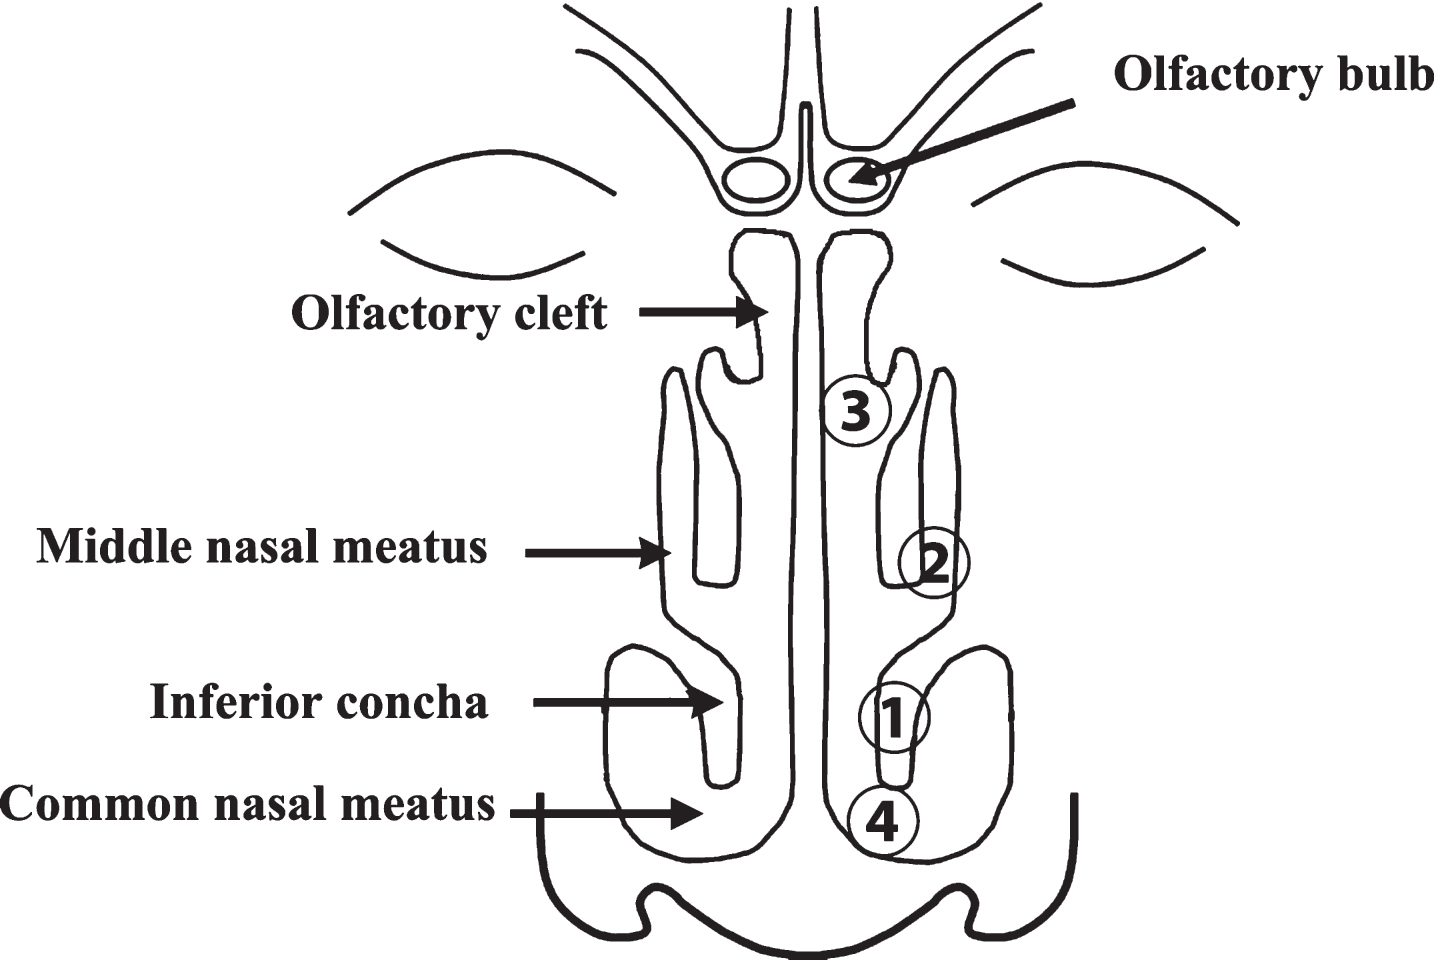 Anatomy of the nasal cavity. Nasal smears were taken from the inferior concha (1), middle nasal meatus (2), olfactory cleft (3), and common nasal meatus (4) in that order.